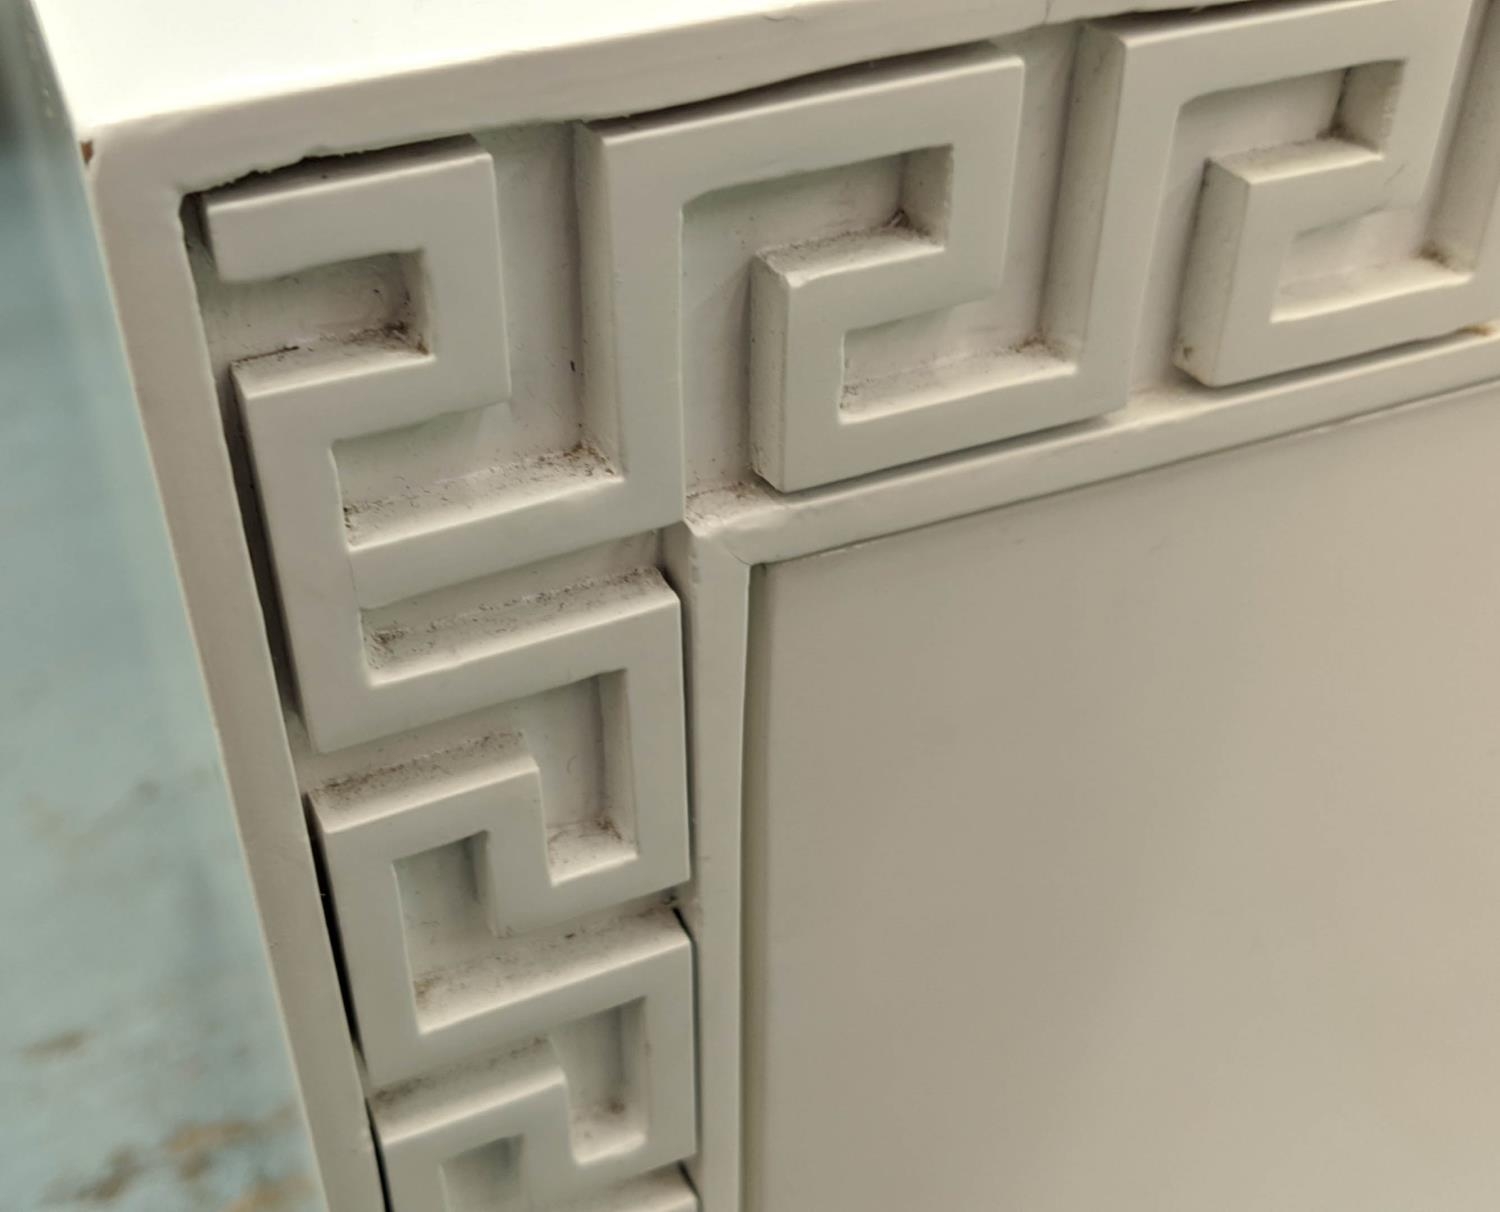 SIDE CHESTS, a pair, 71cm x 46cm x 82cm, contemporary design white lacquered Greek key detail. (2) - Image 7 of 9